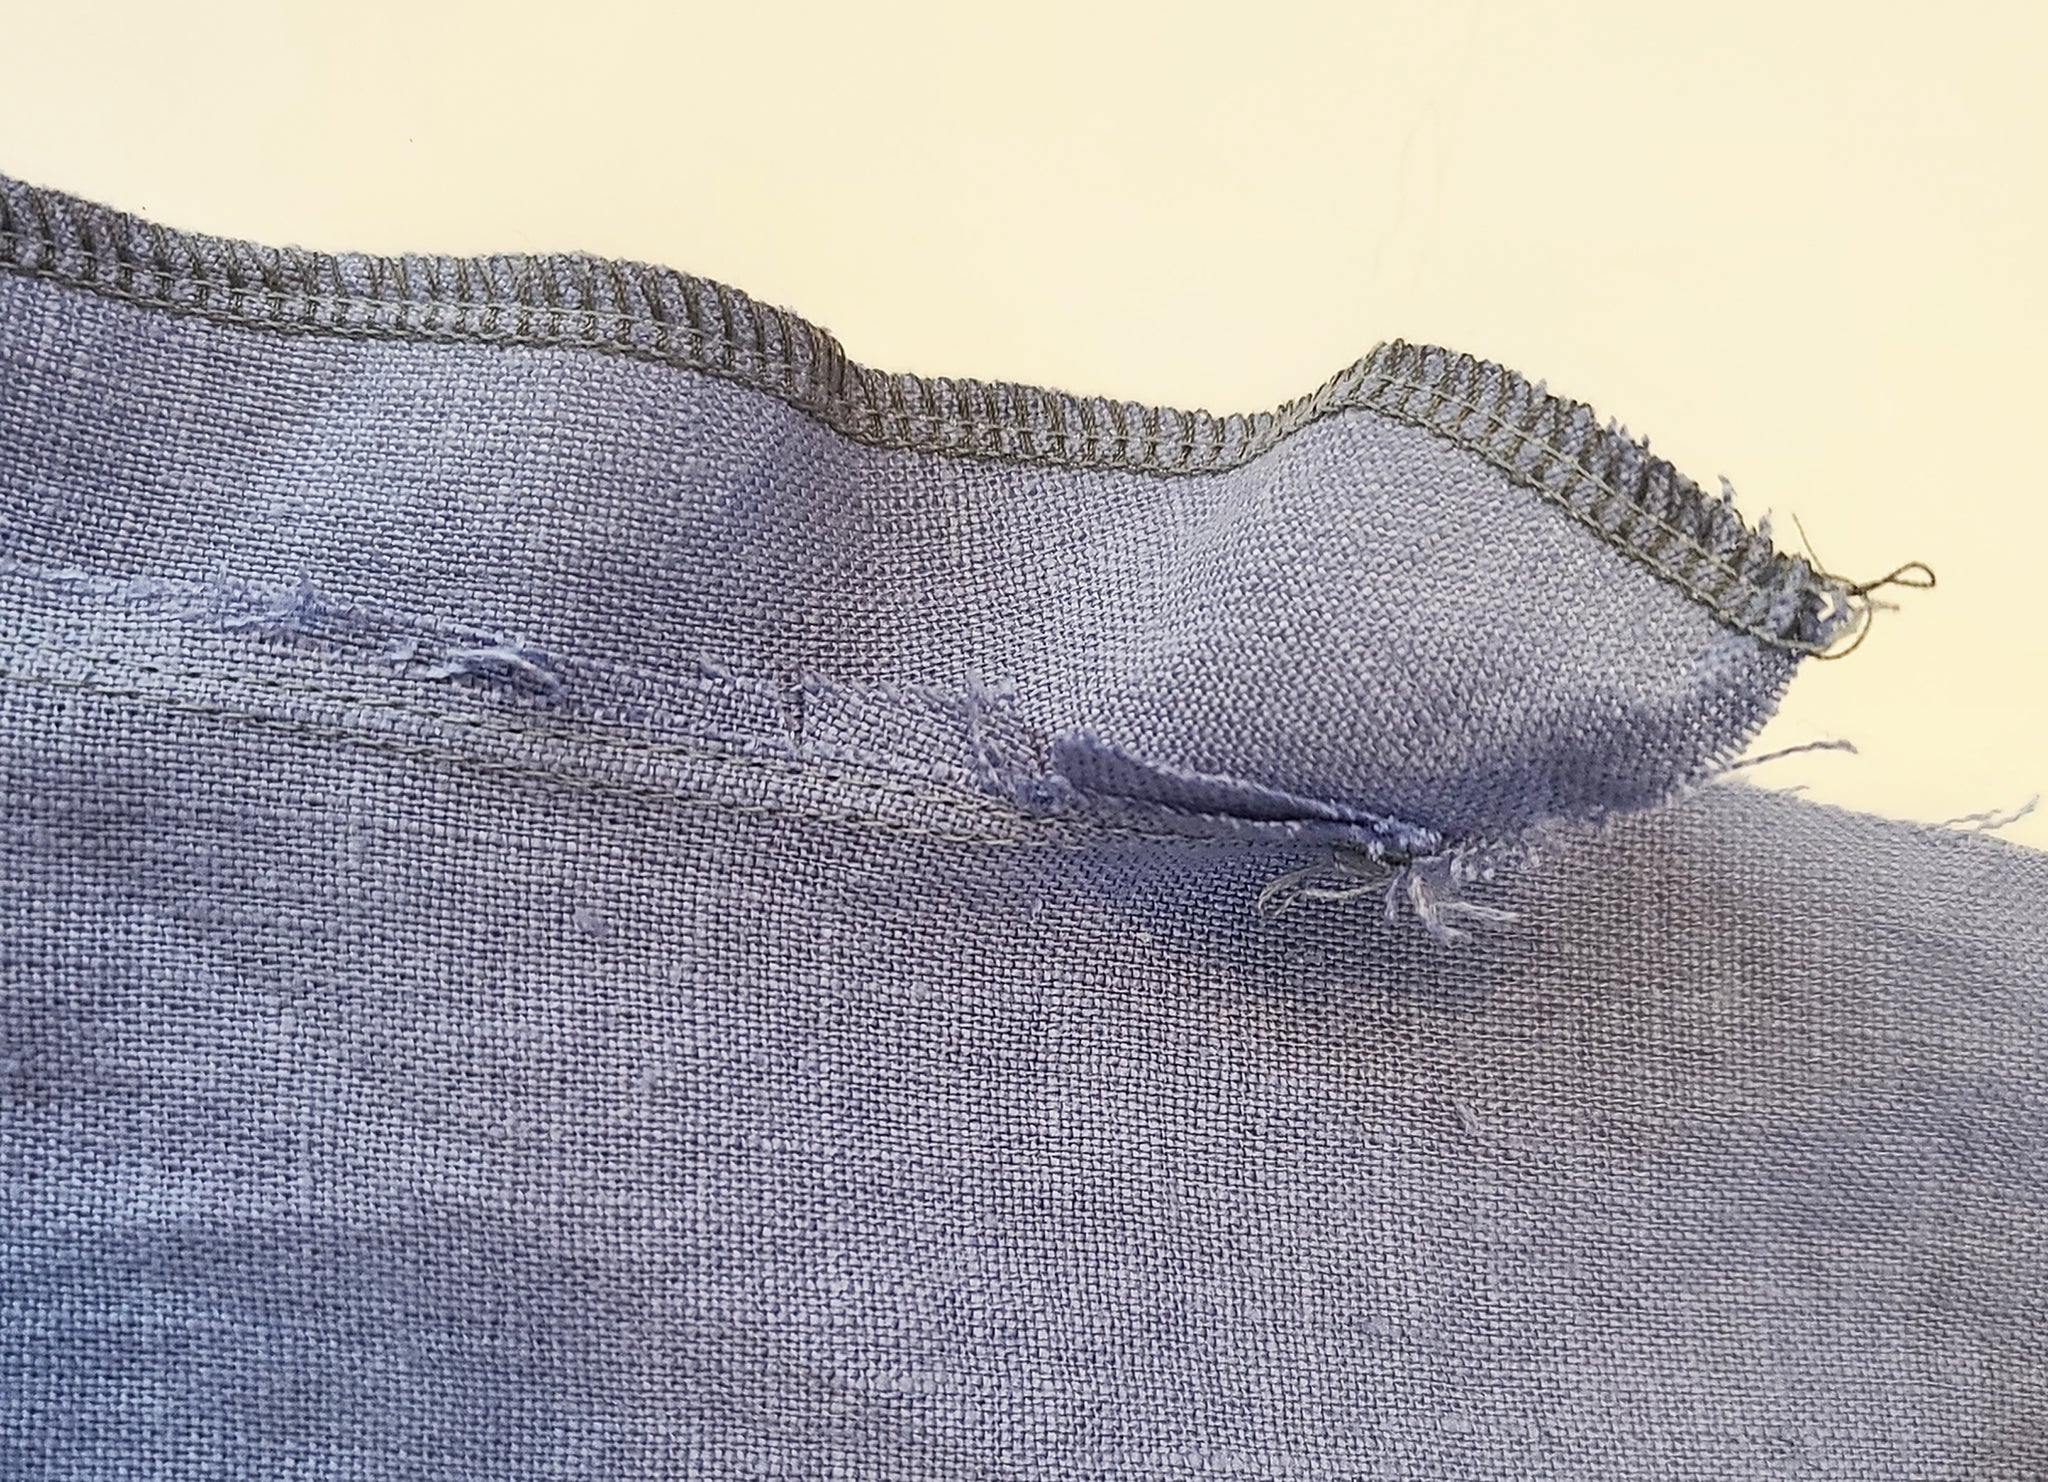 Pocket facing understitching from the back